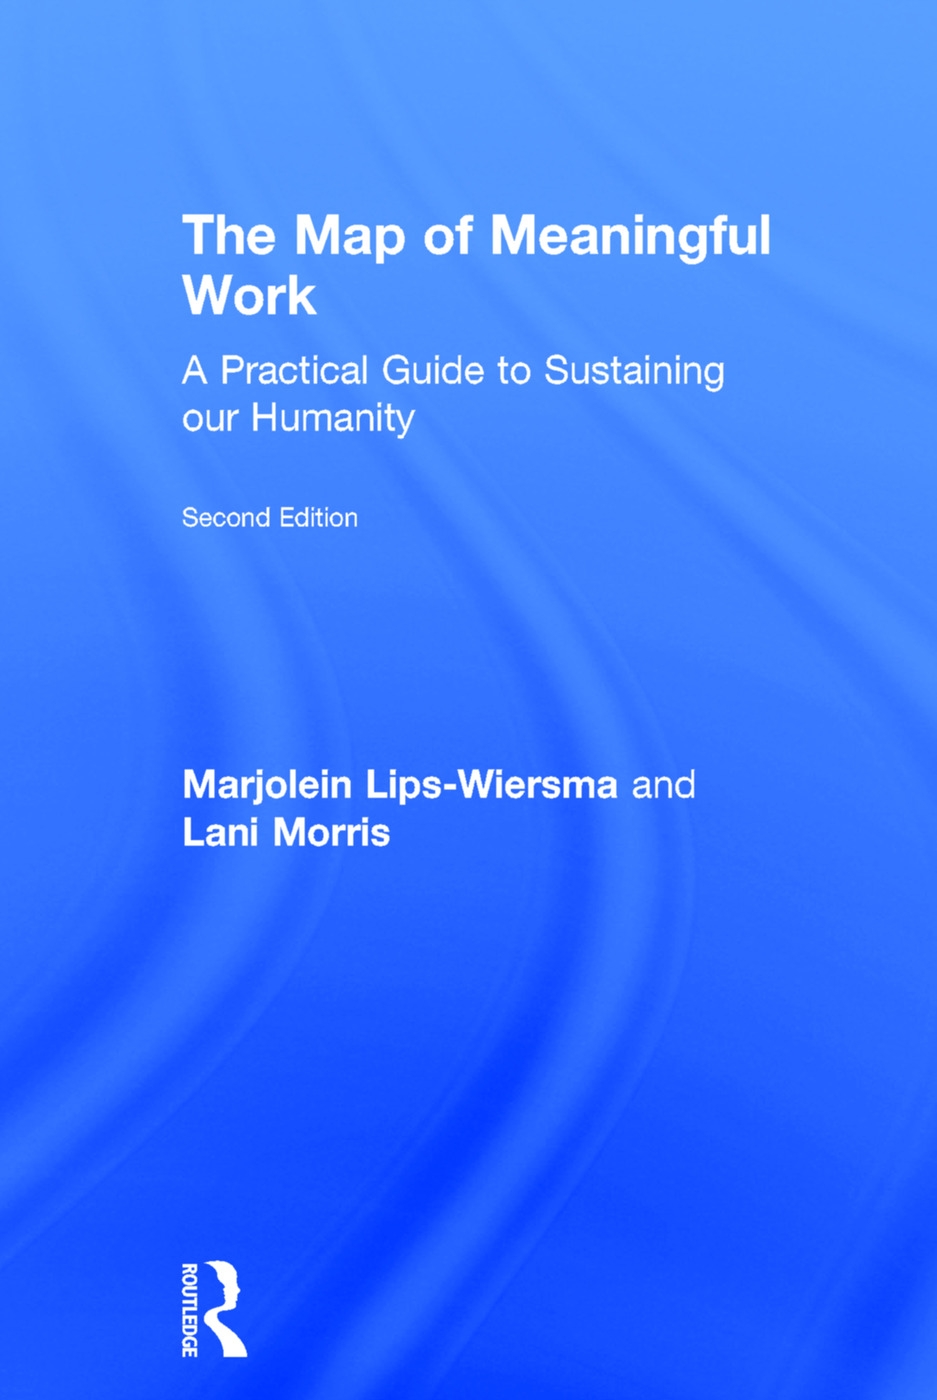 The Map of Meaningful Work (2e): A Practical Guide to Sustaining Our Humanity